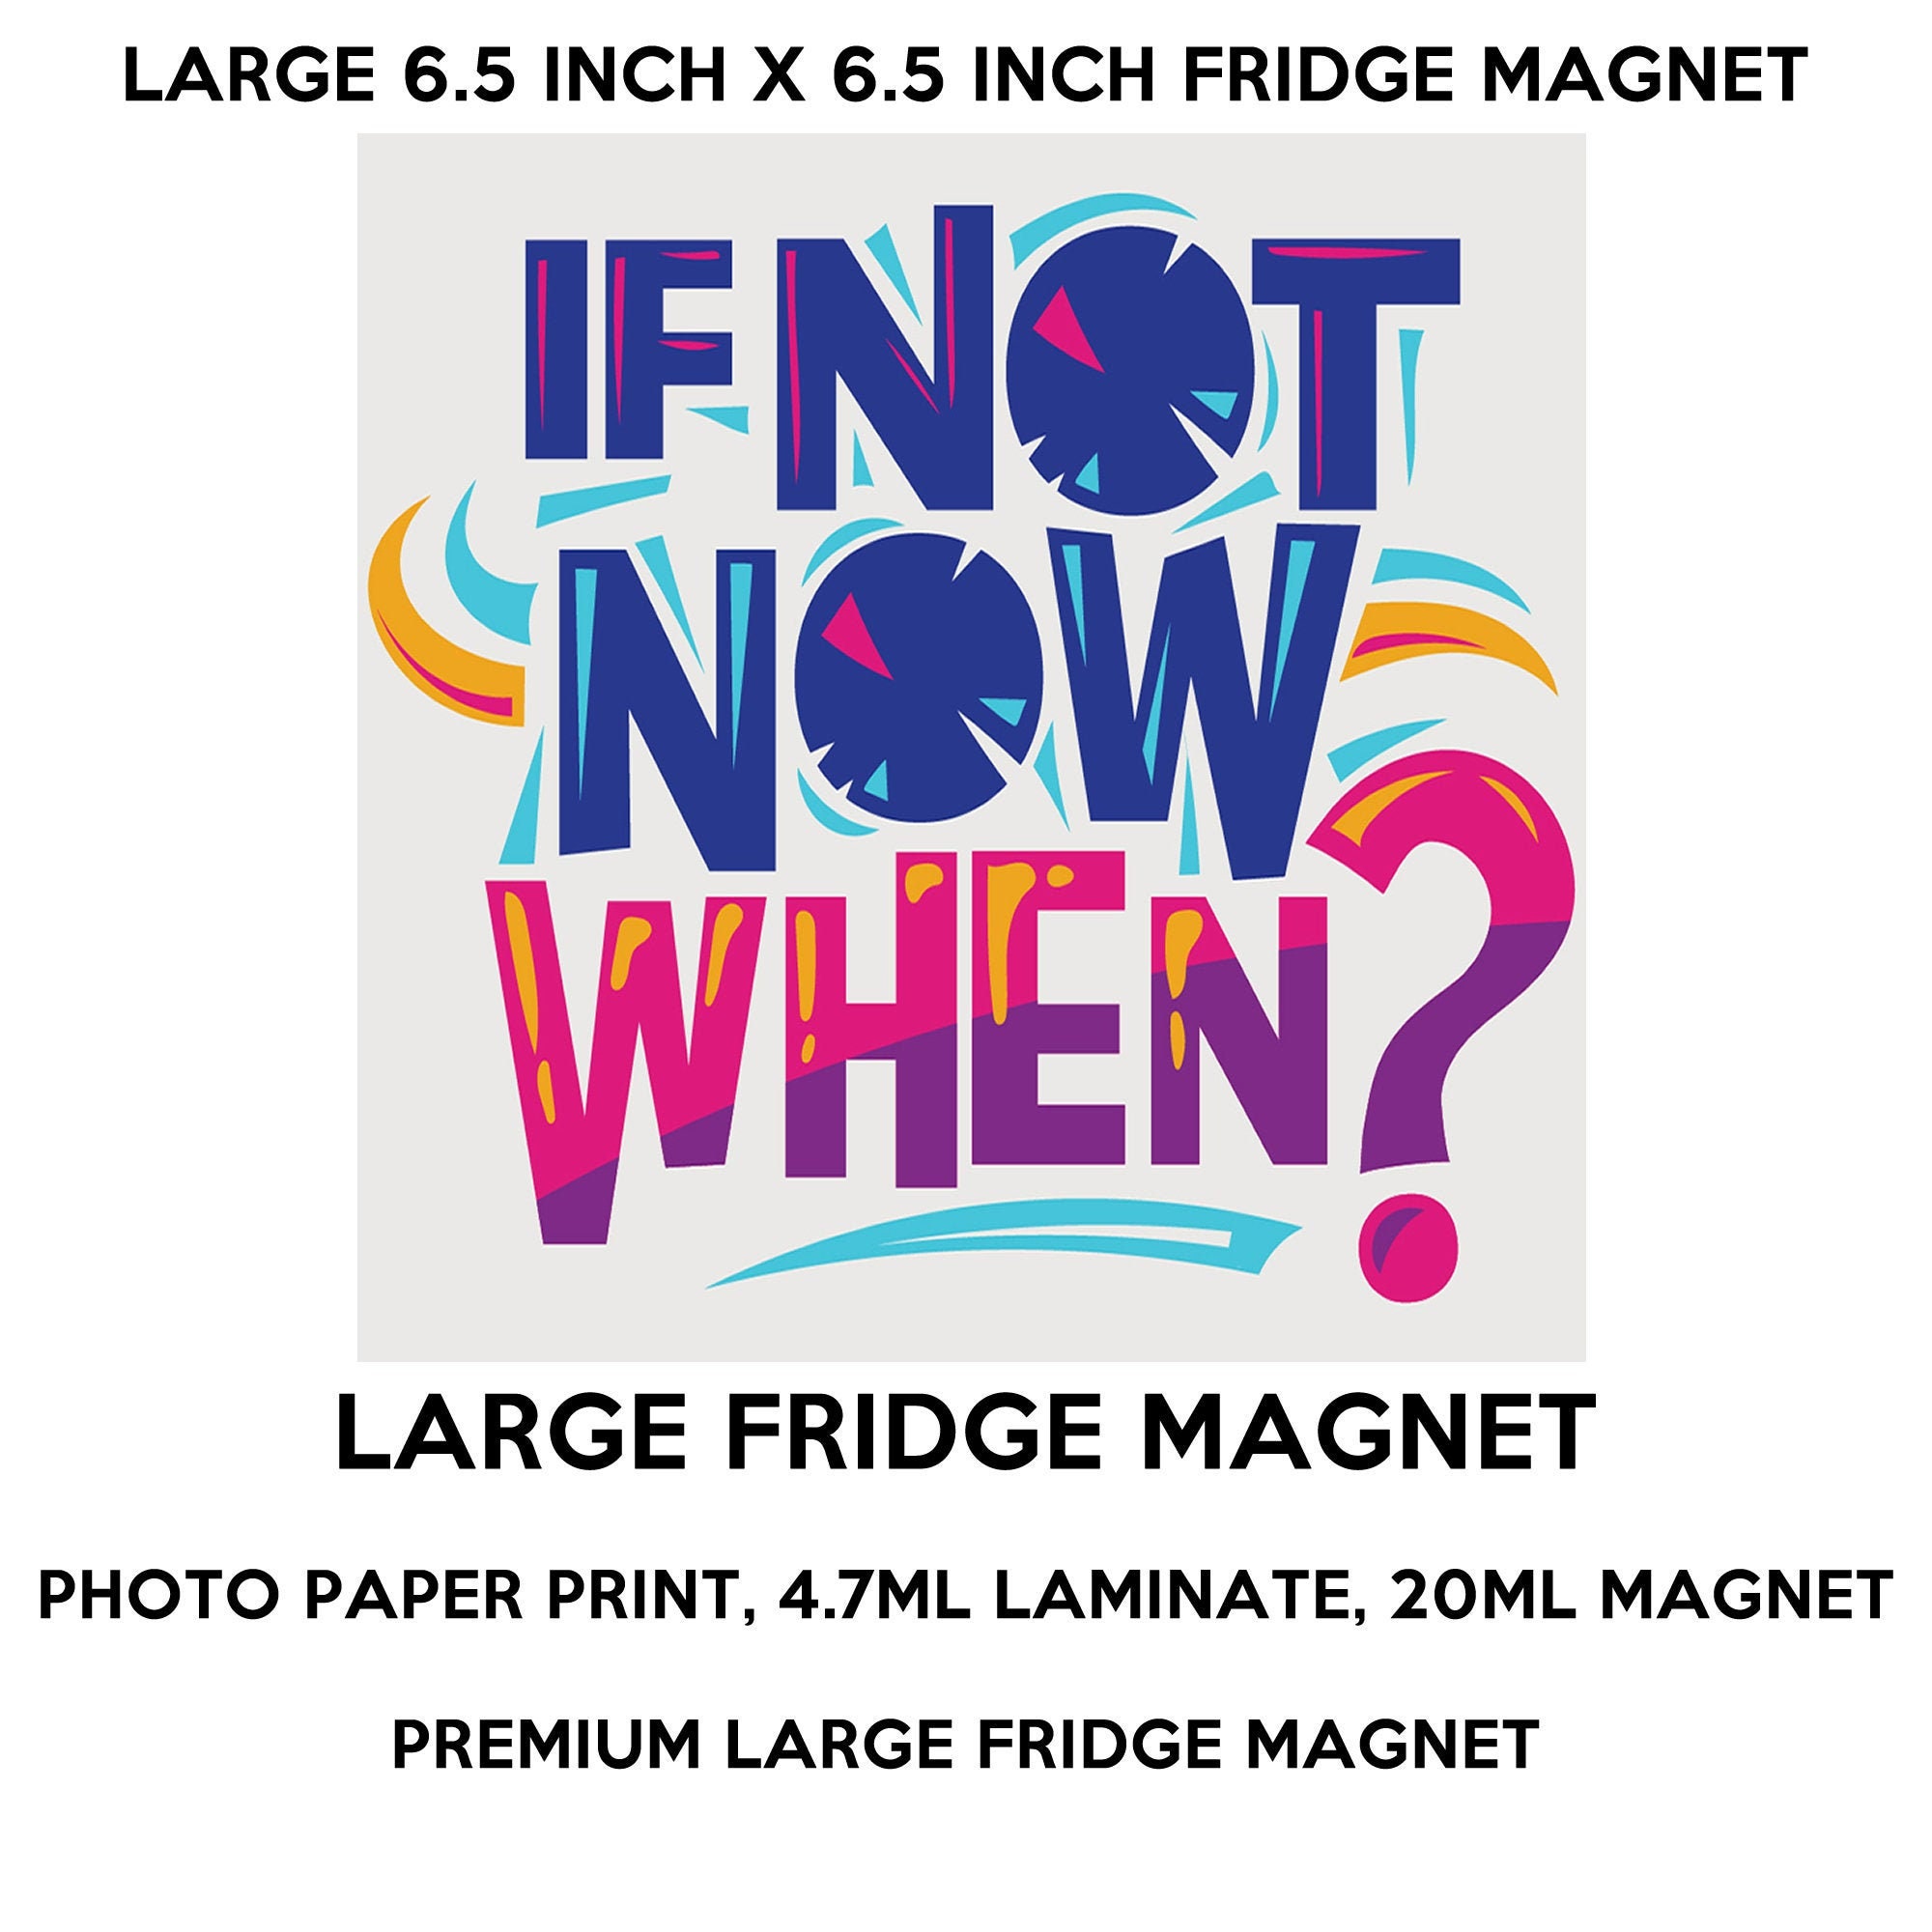 If Not Now When? fridge magnet, large 6 1/2 x 6 1/2 inch premium fridge magnet that stands out.